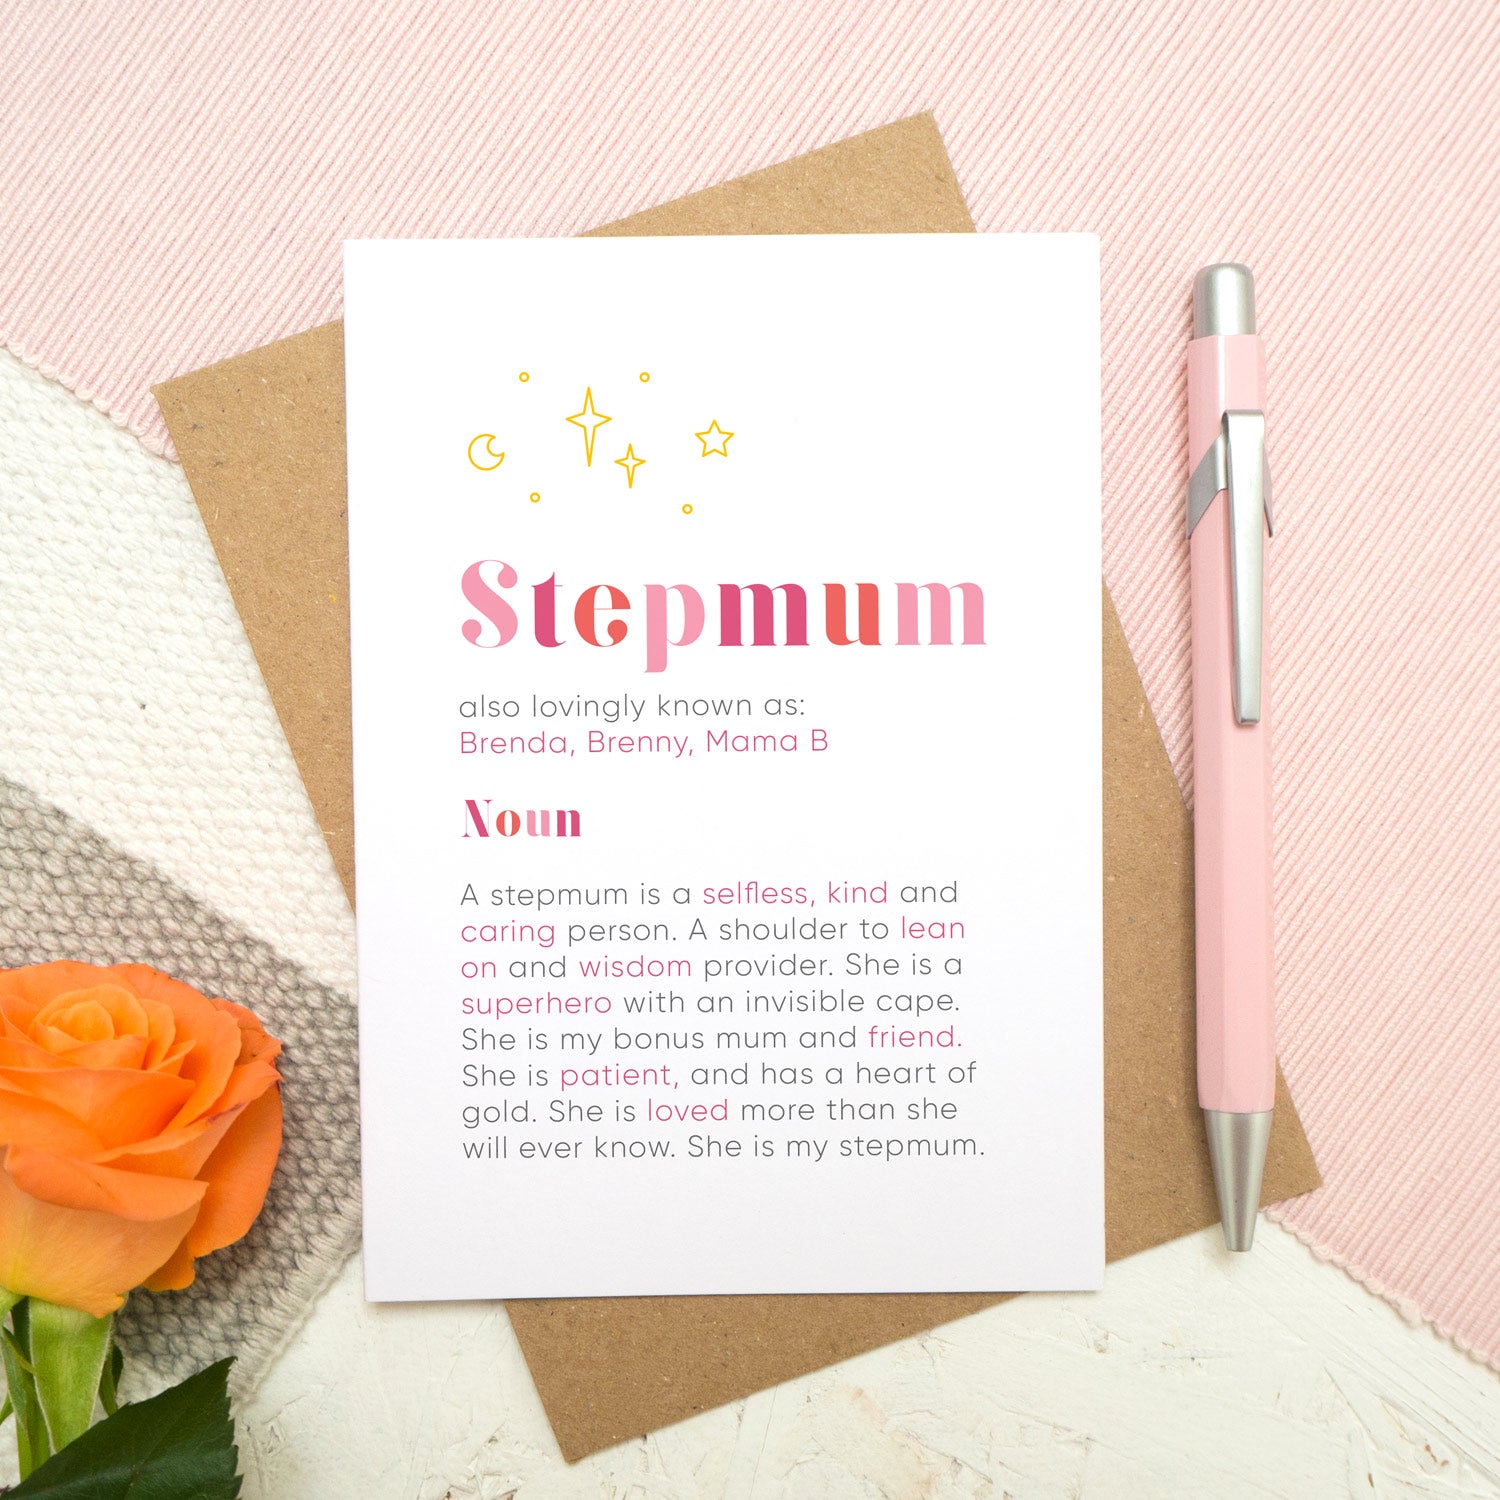 A personalised Stepmum dictionary definition card lying flat on top of a kraft brown envelope on top of a pink runner and a grey and white striped rug. There is an orange rose in the bottom left corner and a pen for scale on the right. The card features hand drawn writing in varying tones of pink and a definition of what a Stepmum is with key words highlighted in pink.